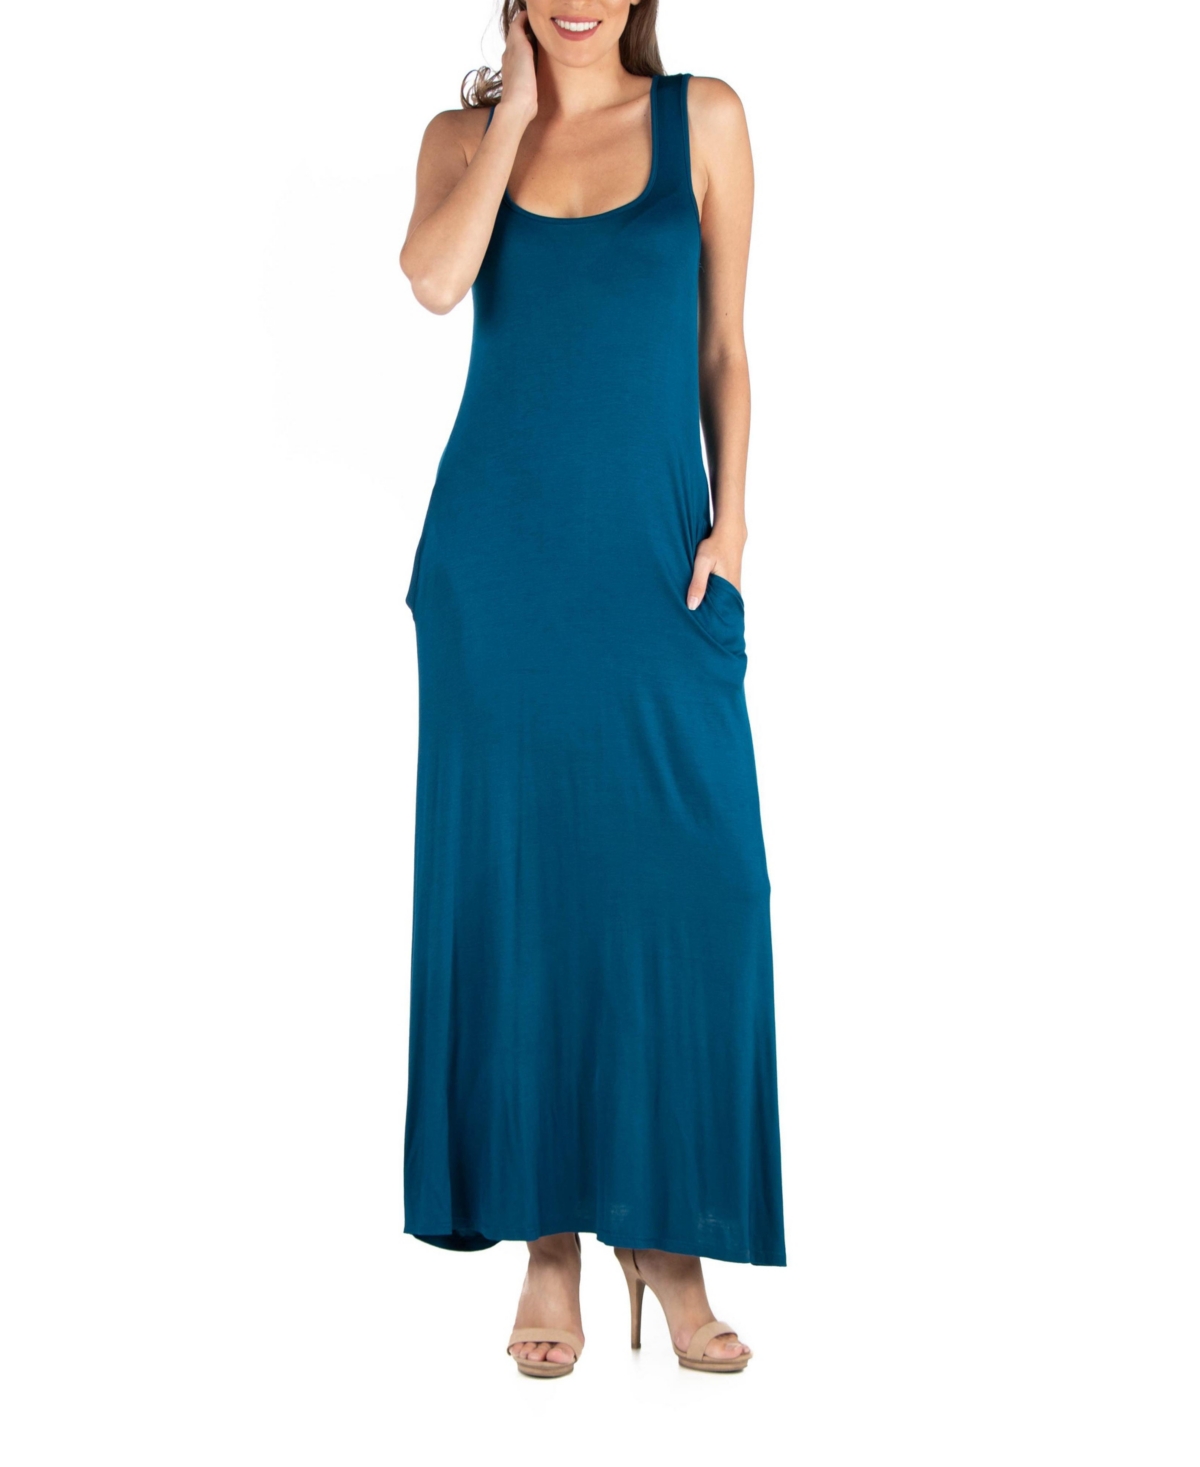 Shop 24seven Comfort Apparel Women's Scoop Neck Sleeveless Maxi Dress With Pockets In Teal